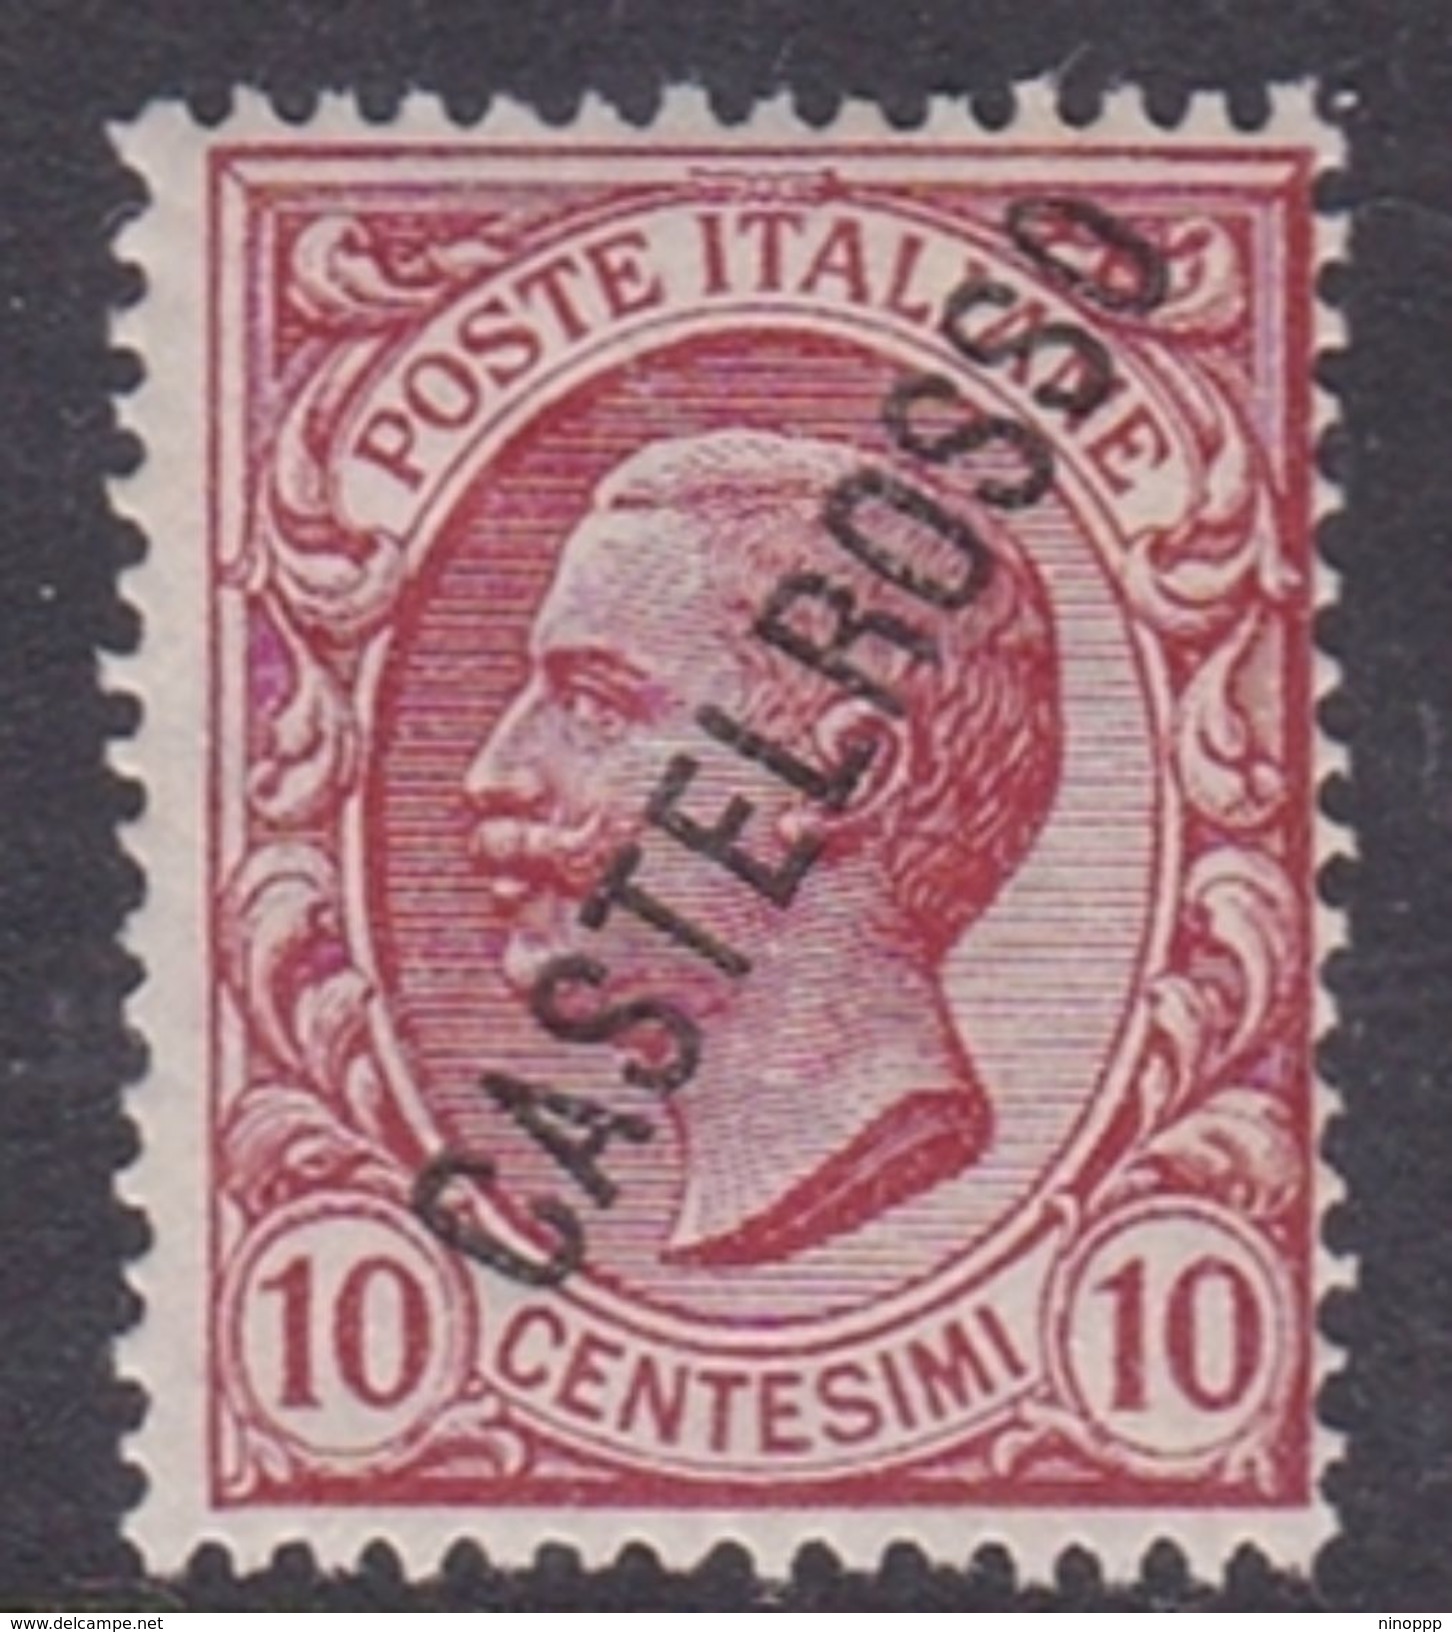 Italy-Colonies And Territories-Castelrosso S16 1924 10c Rose MNH - Emissions Générales